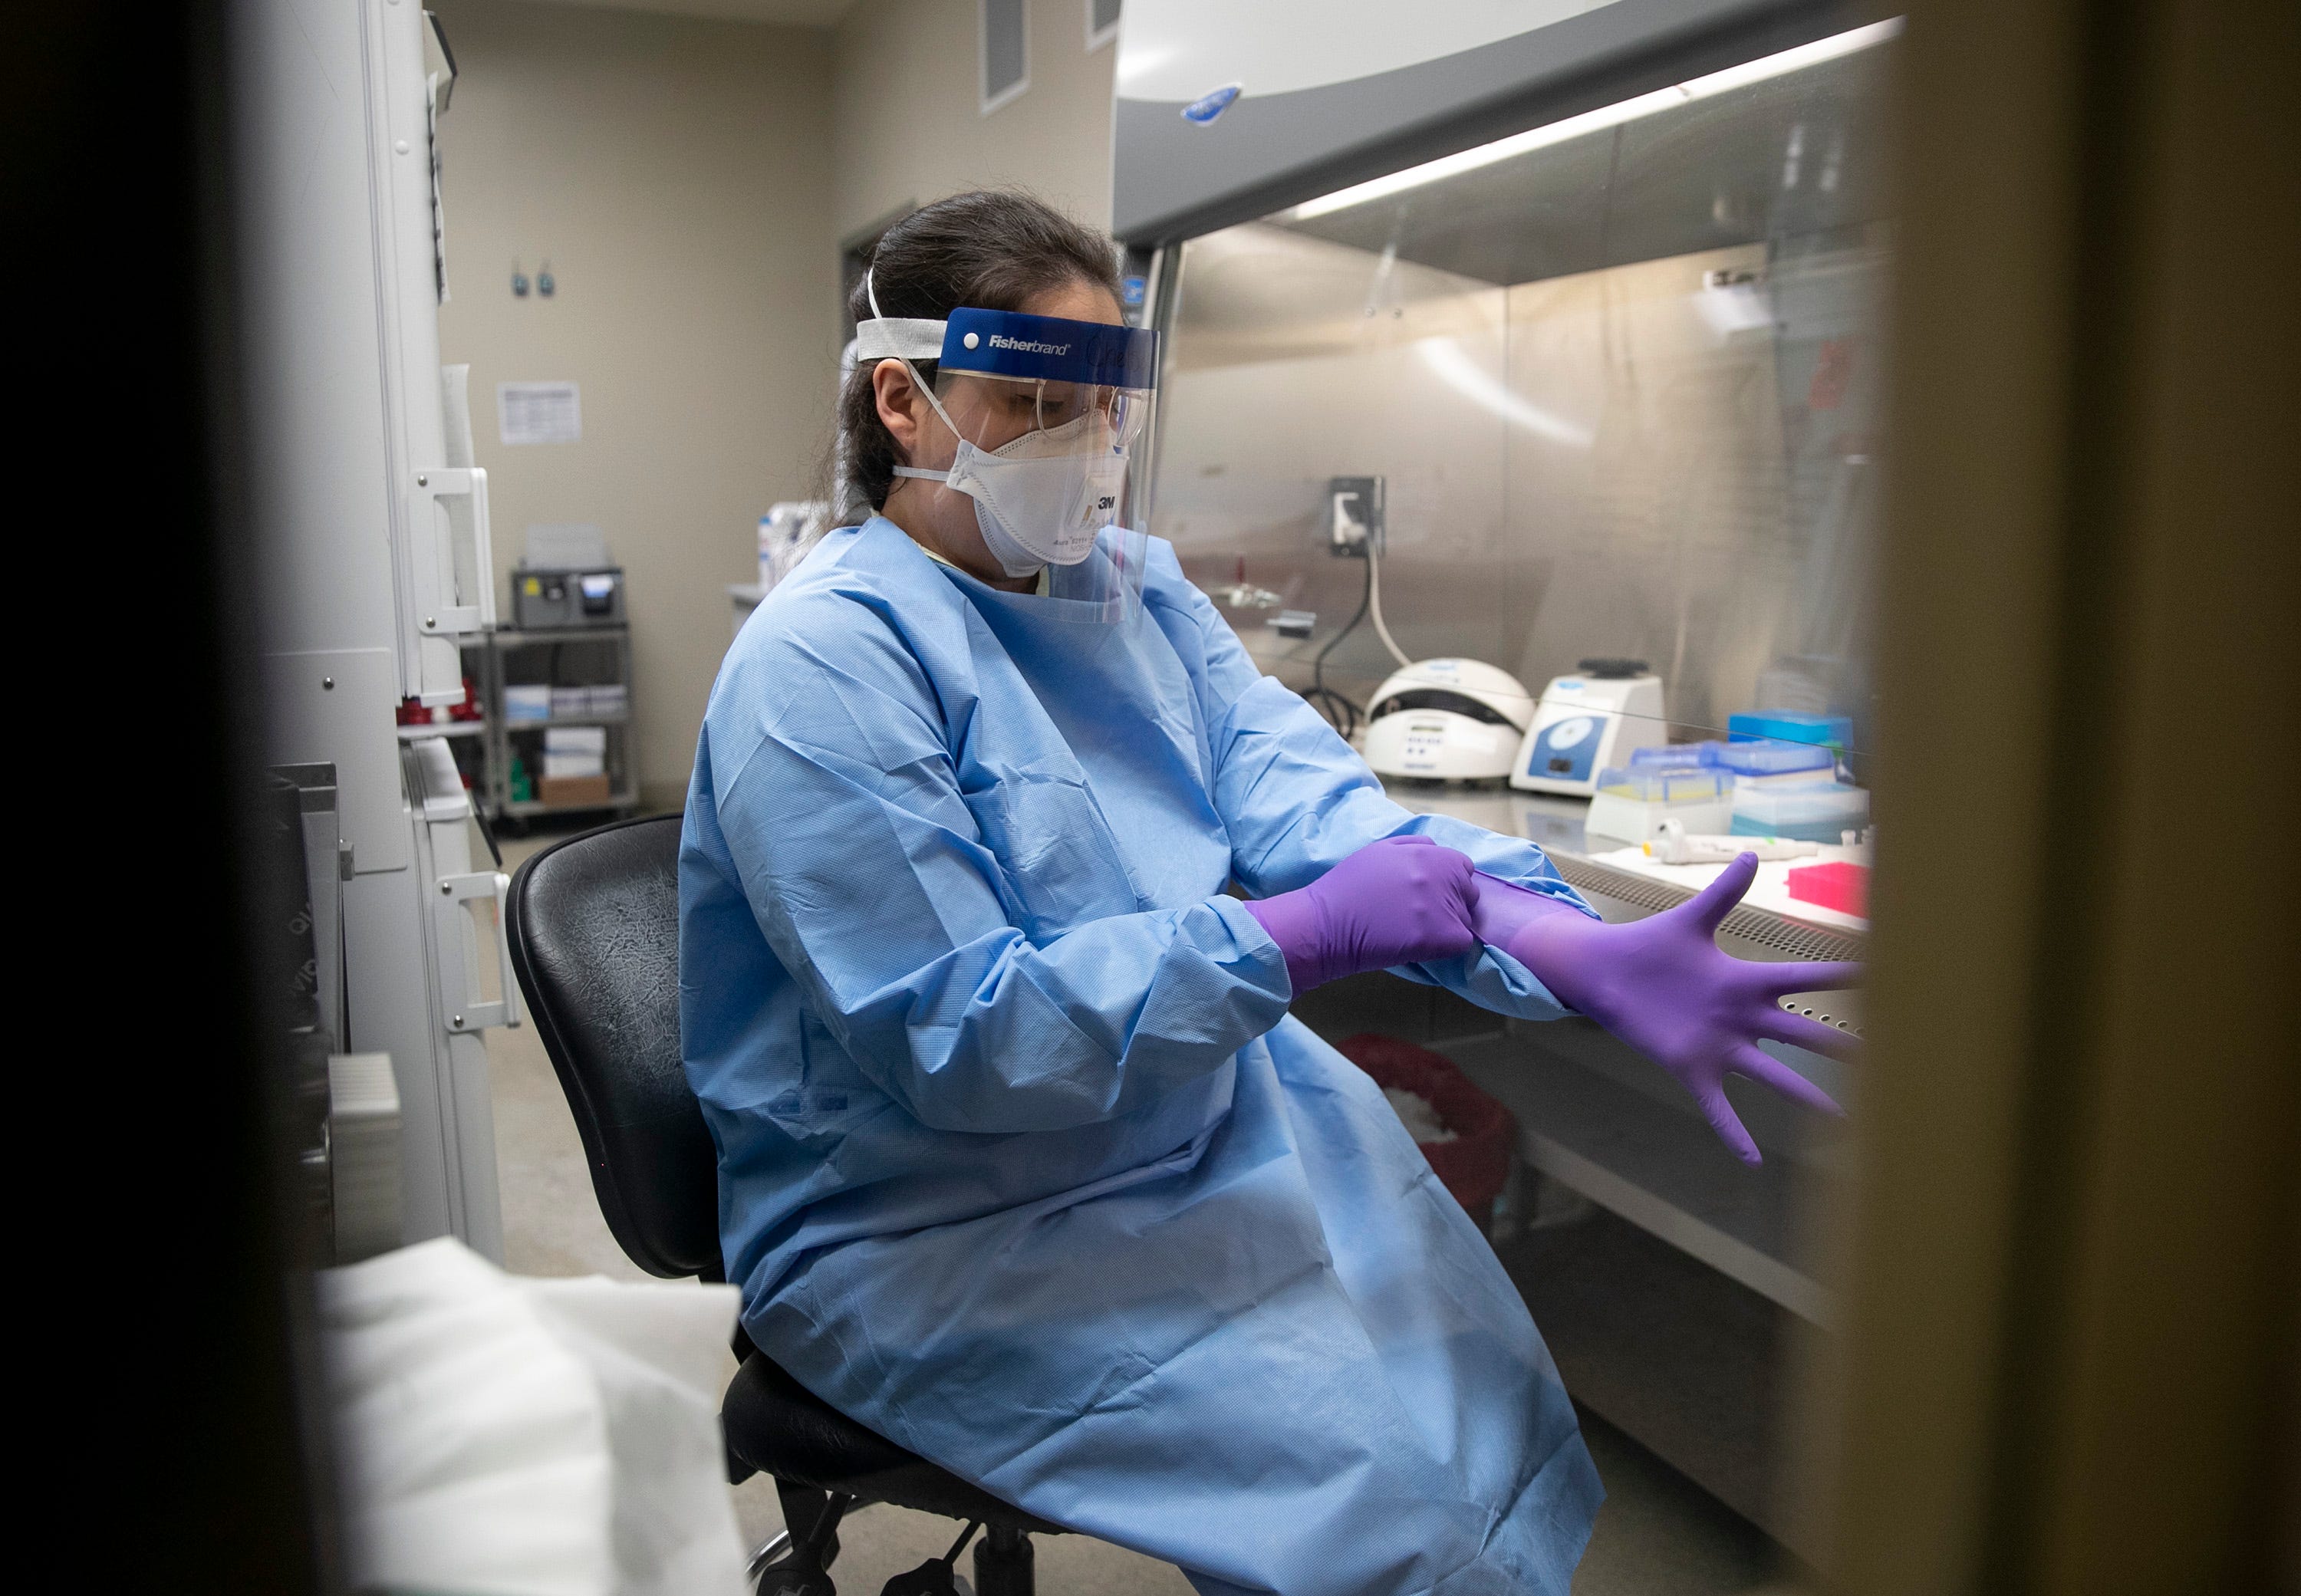 Microbiologist Chelsey Tiger tests samples for viruses in the virology lab at the Department of State Health Services Laboratory Building on Thursday March 5, 2020, where coronavirus tests will begin tomorrow.